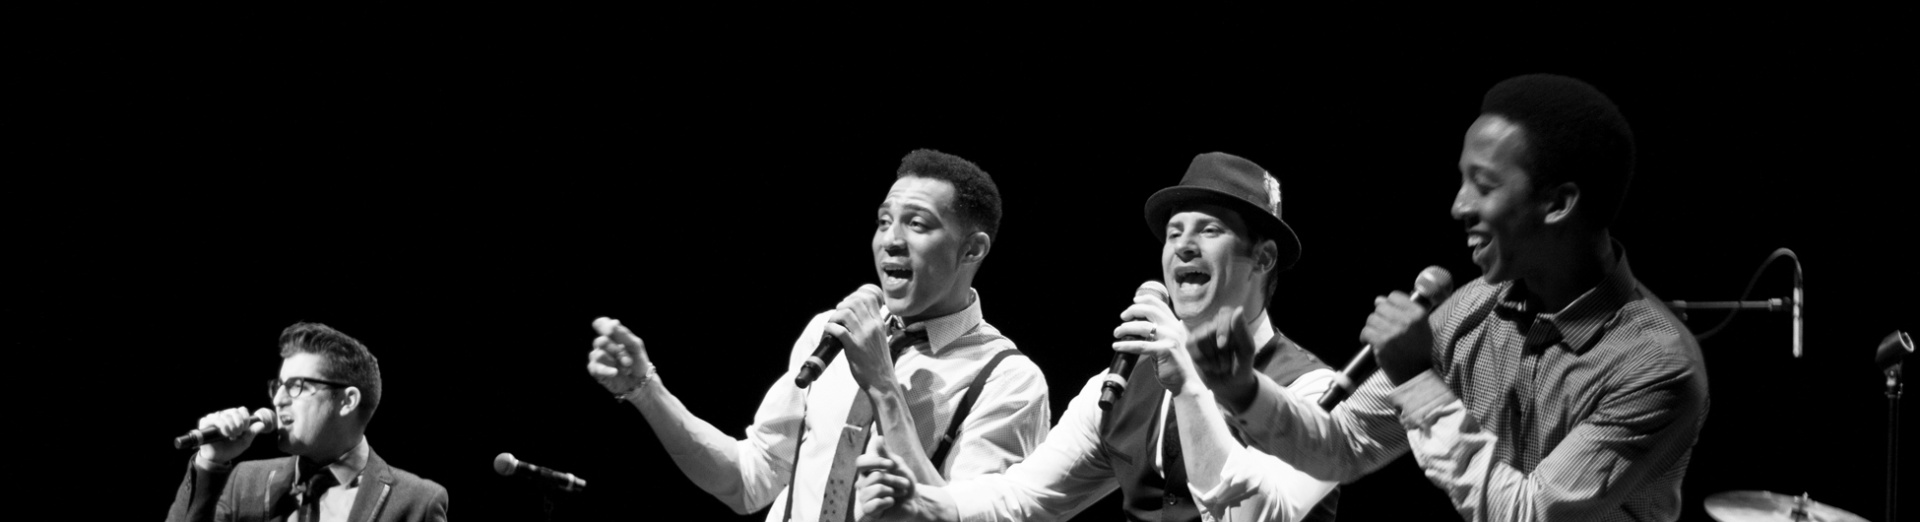 Members of The Doo Wop Project singing on stage against a dark background.